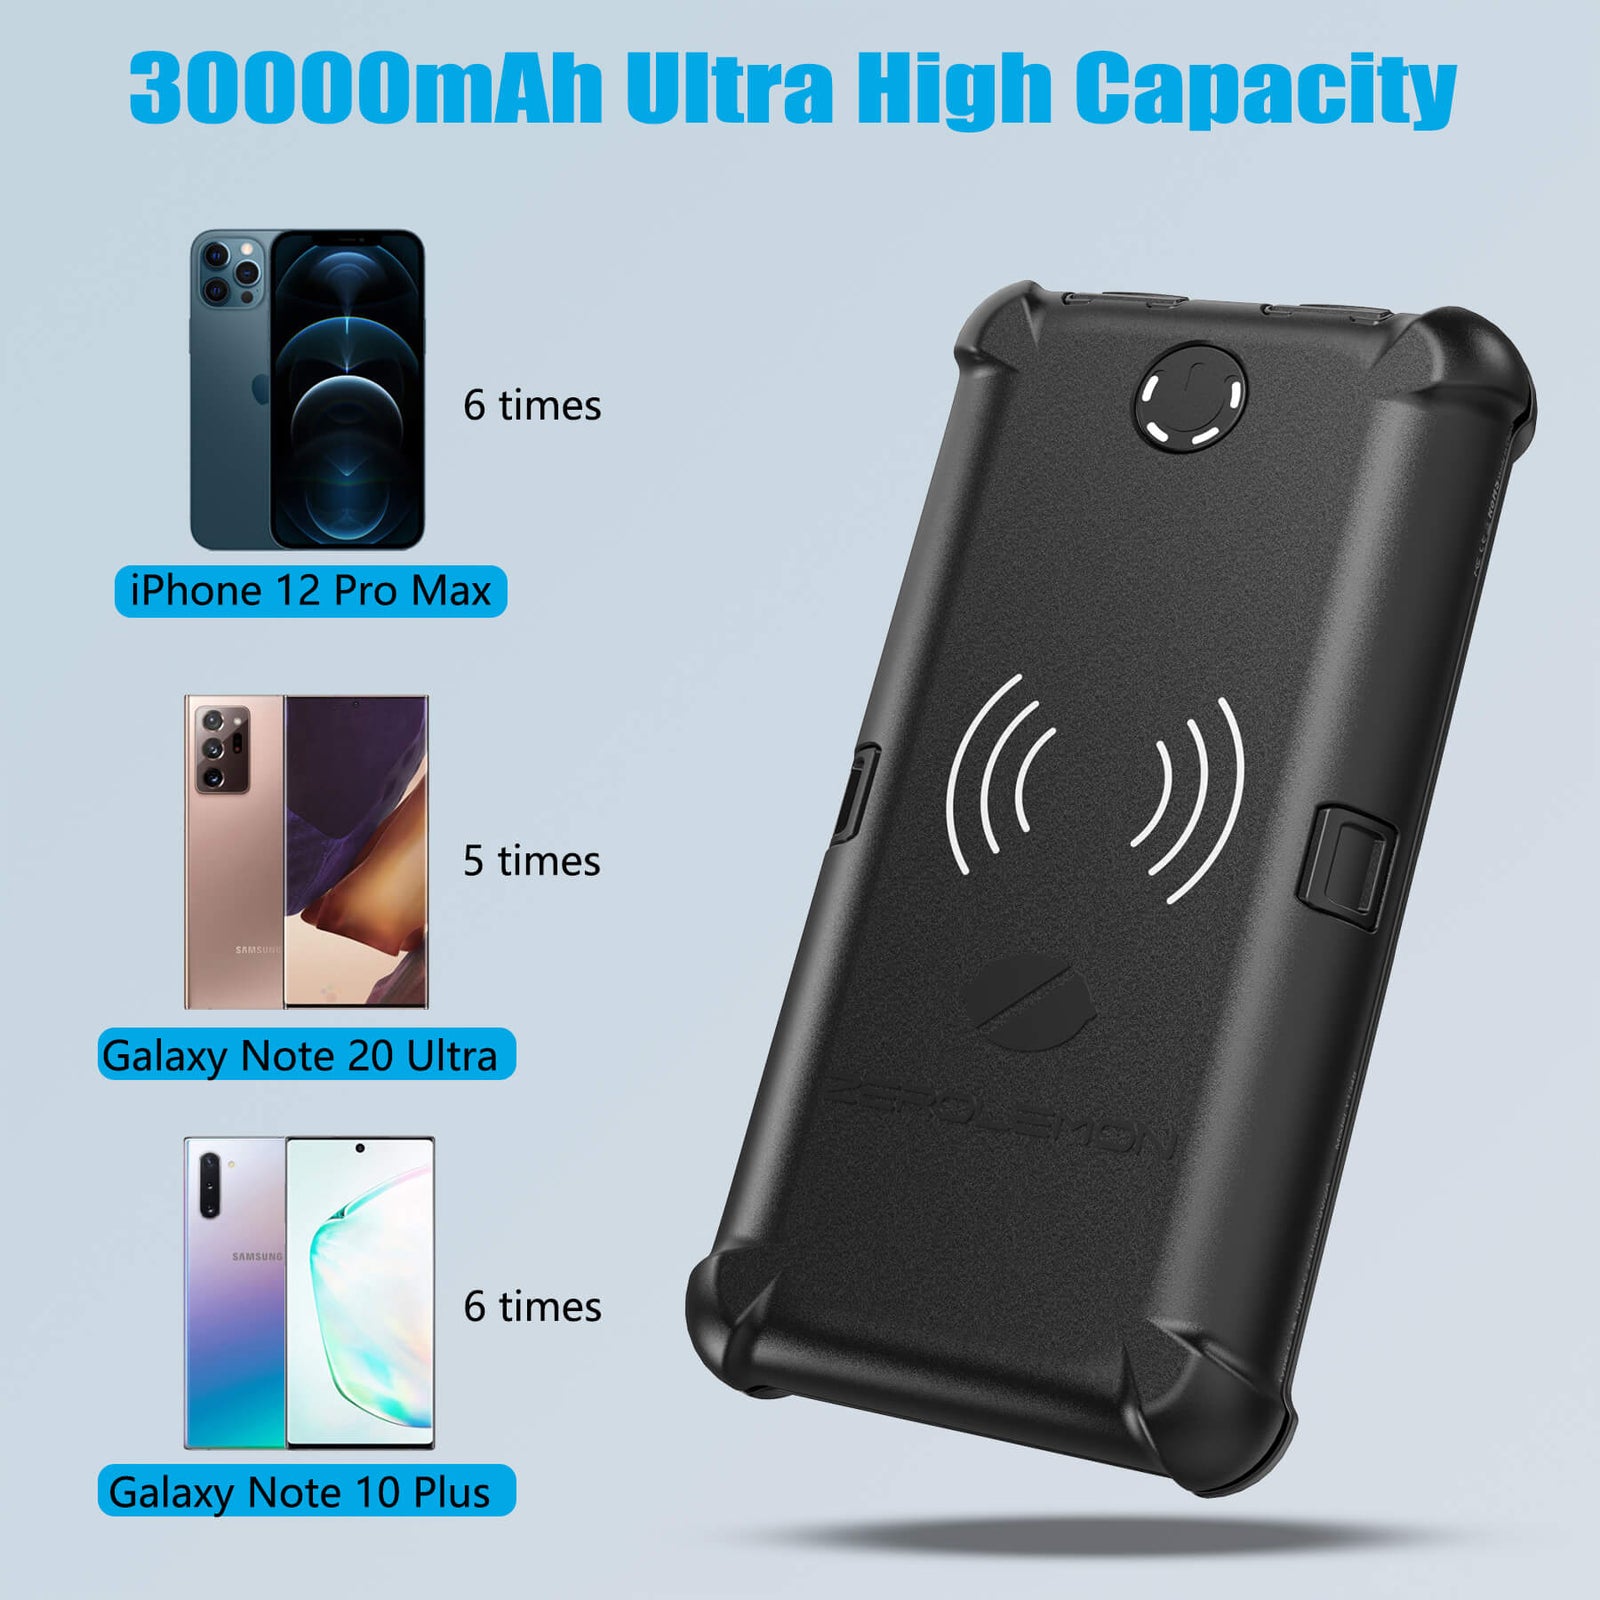 [Upgraded] ToughJuice Pro 30000mAh 22.5W PD USB C Wireless Power Bank [Shipping to US Only]